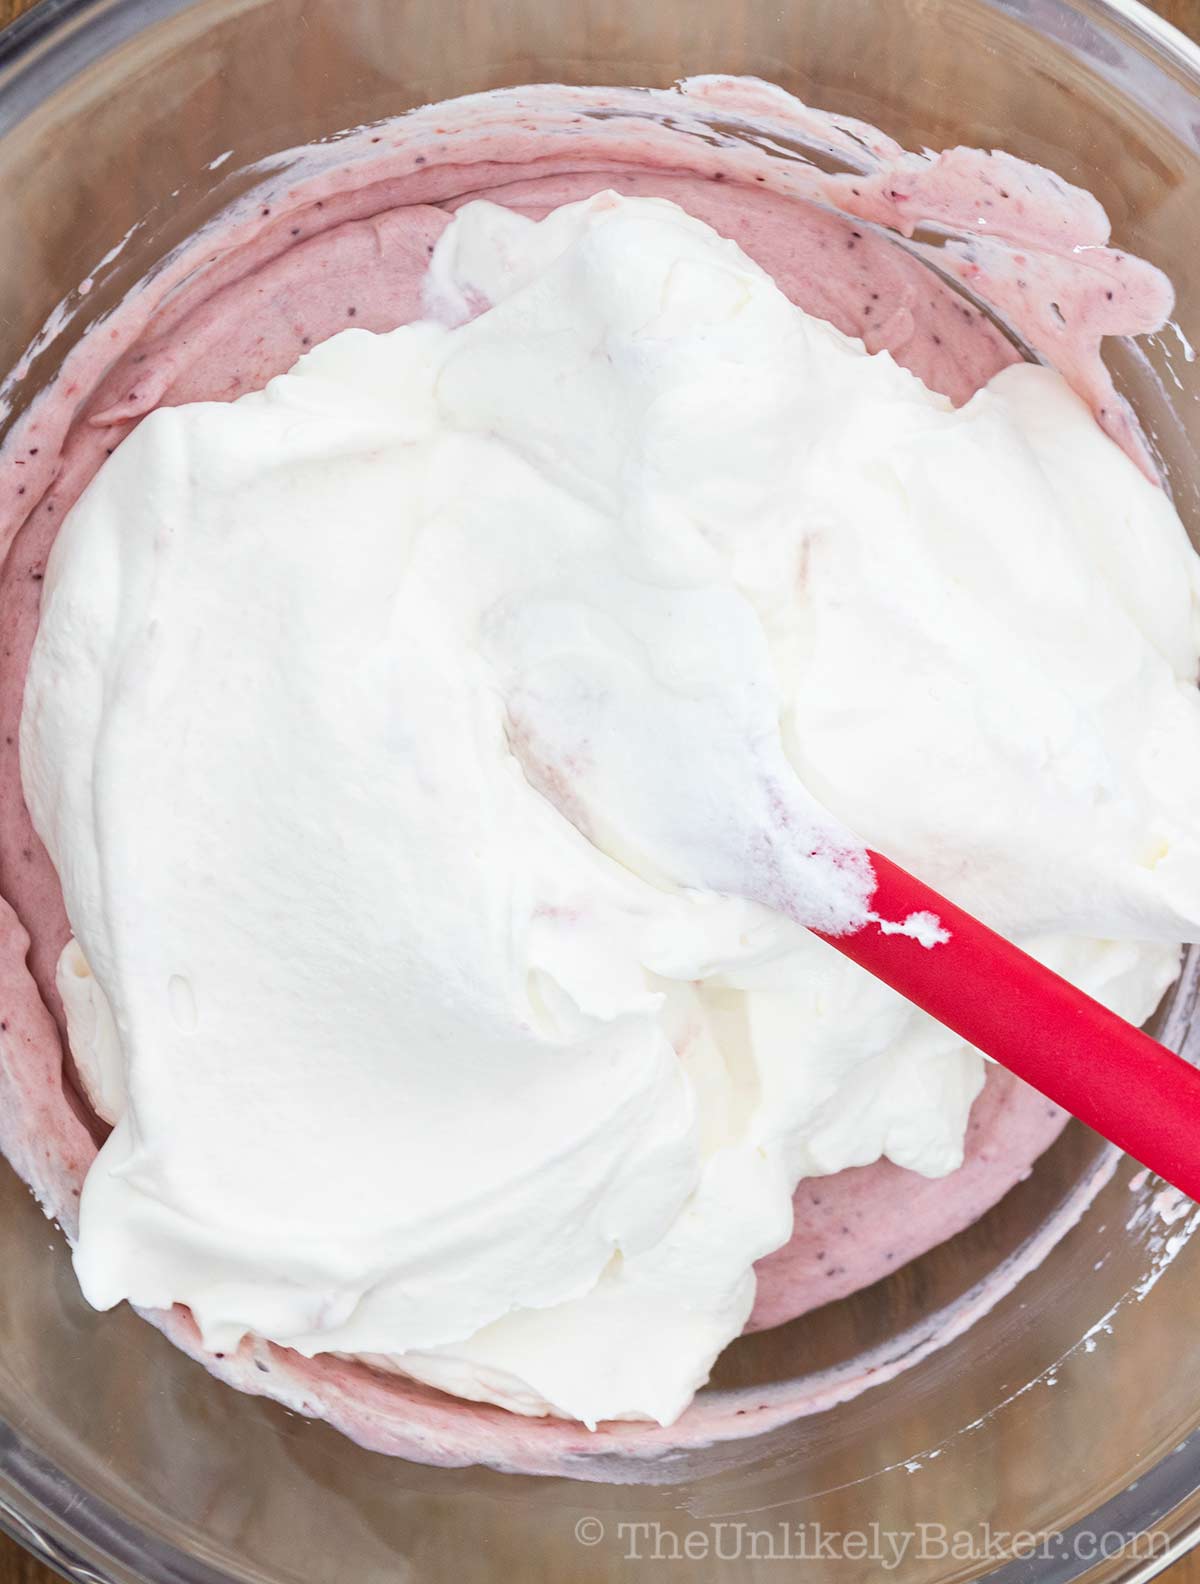 Whipped cream being folded into strawberry mixture.